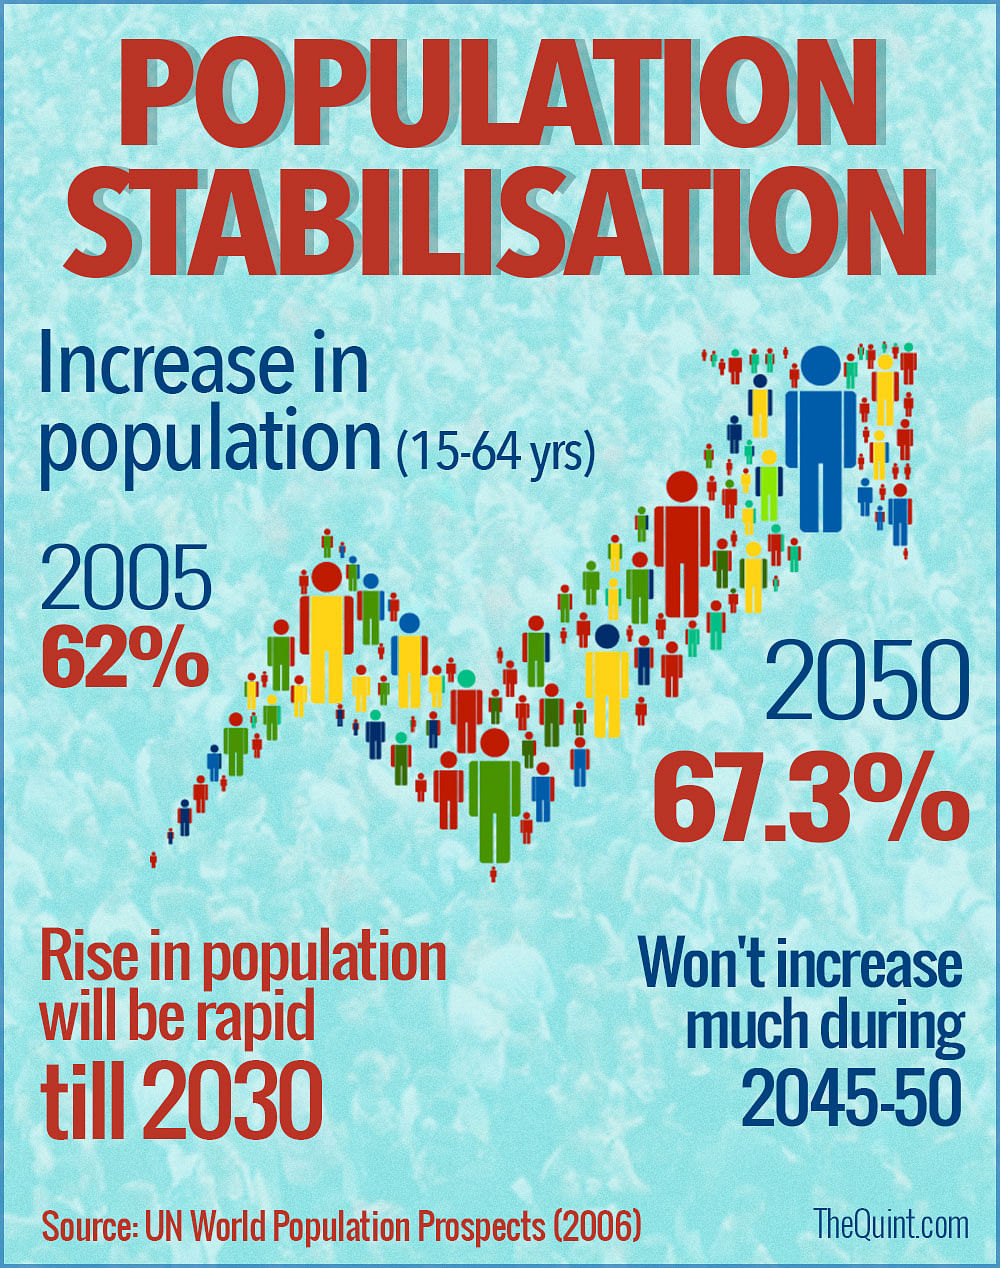 Rapid urbanisation along with increase in population in Northern states will increase pressure on resources by 2050.